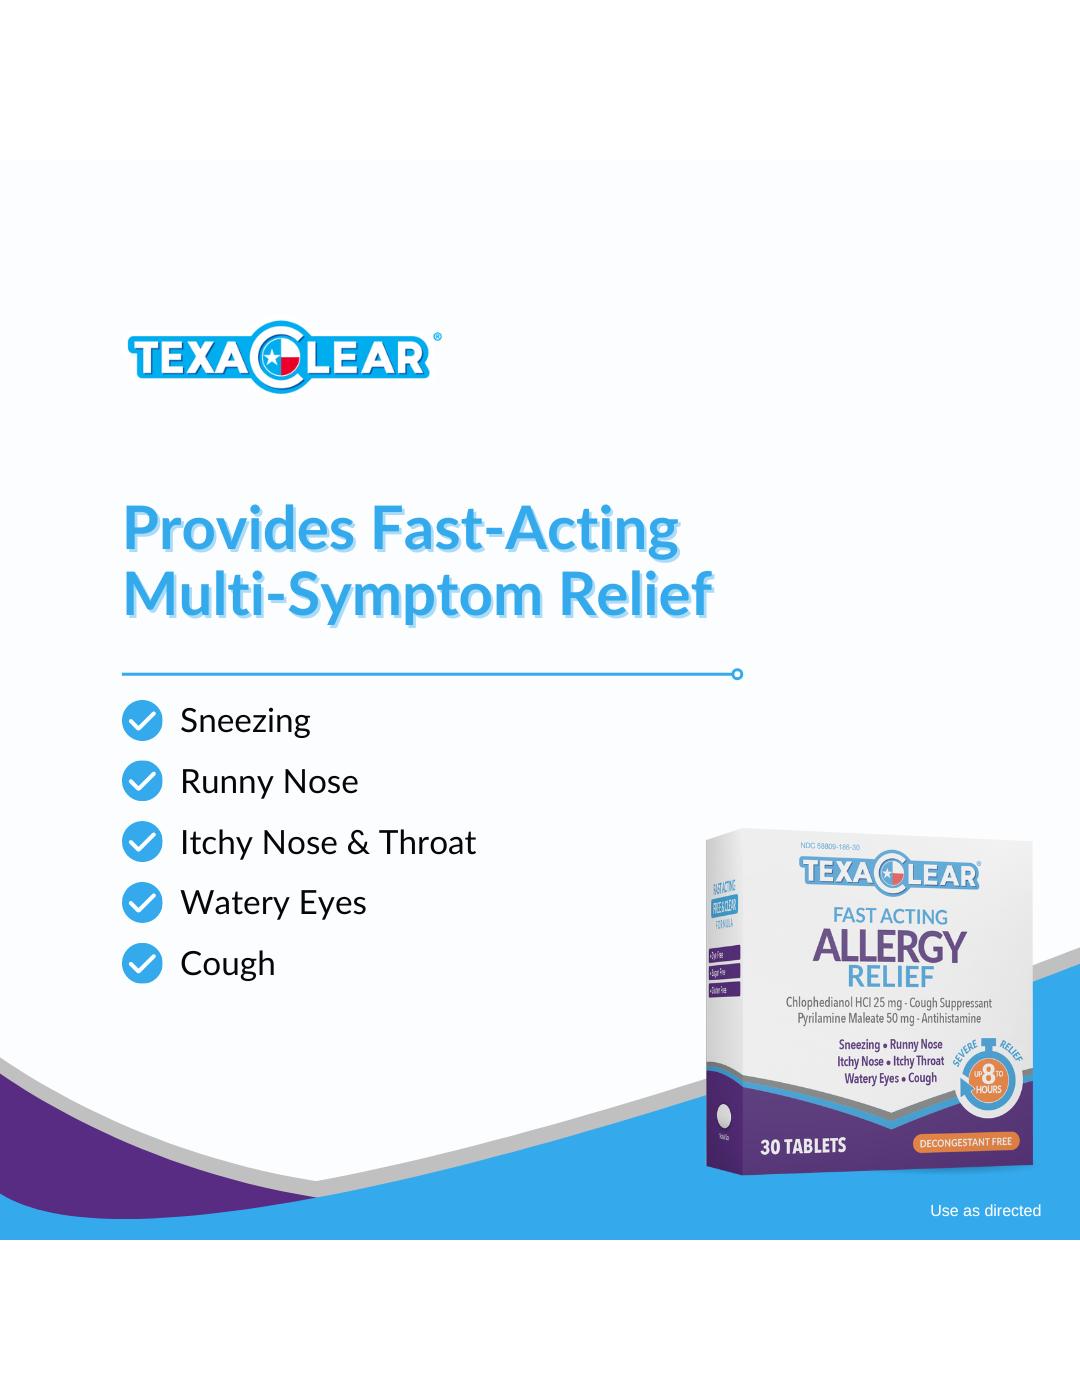 TexaClear Allergy Relief Tablets; image 5 of 6